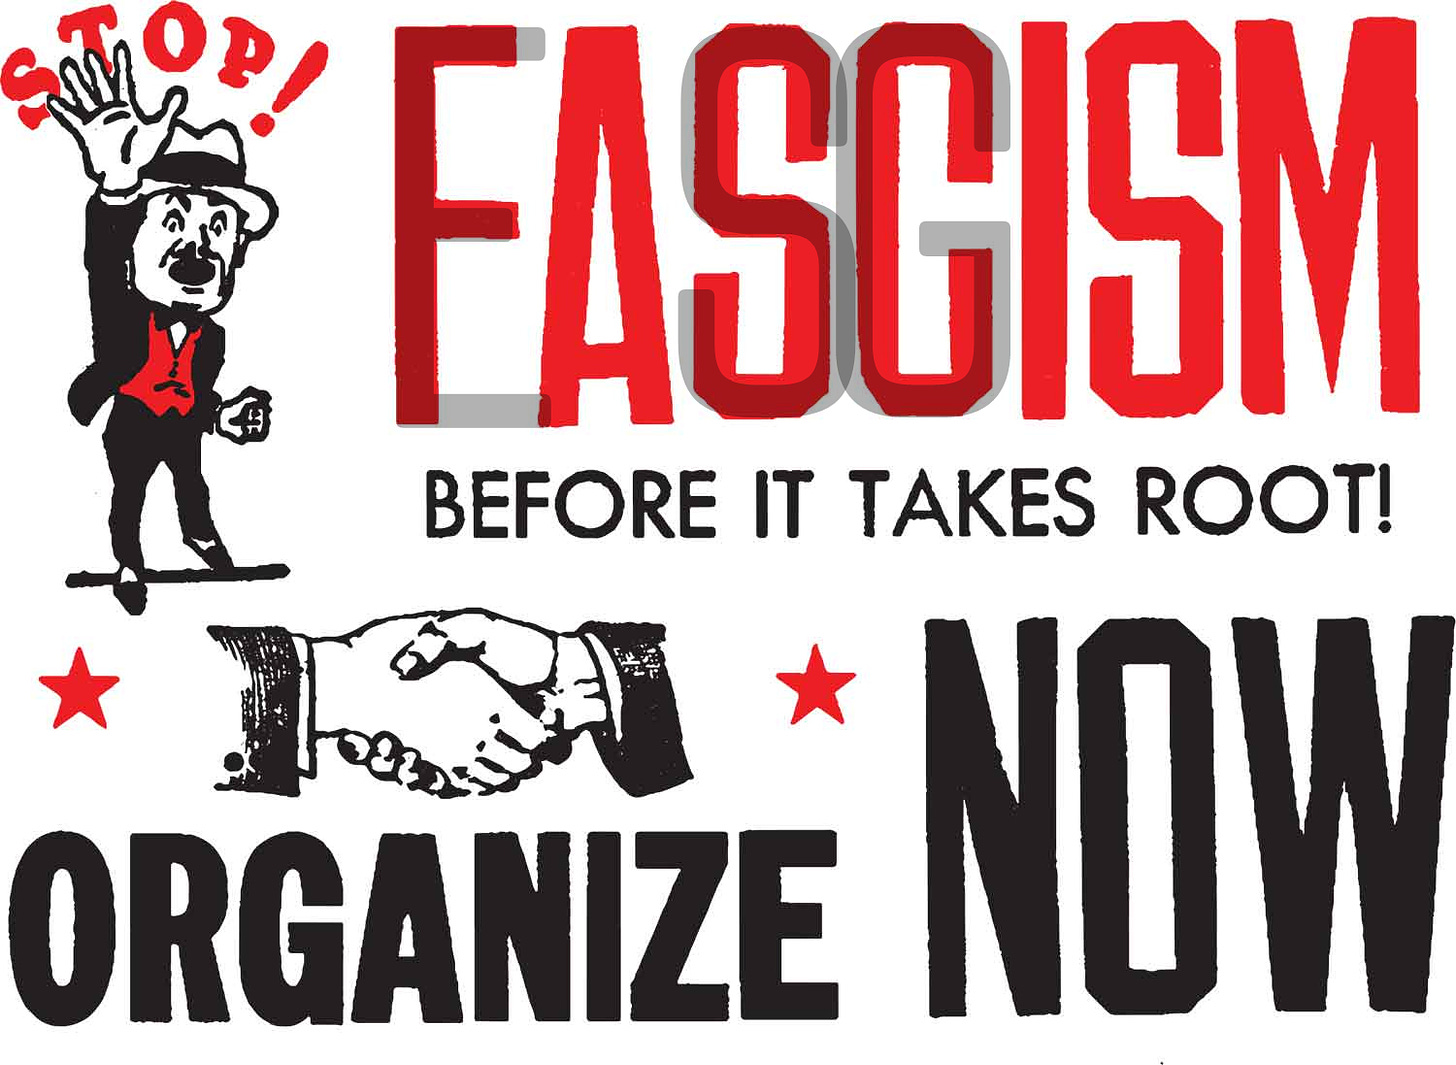 Stop ESGism! Companies that comply with ESG mandates encourage the spread of #fascism. It's time to stop.